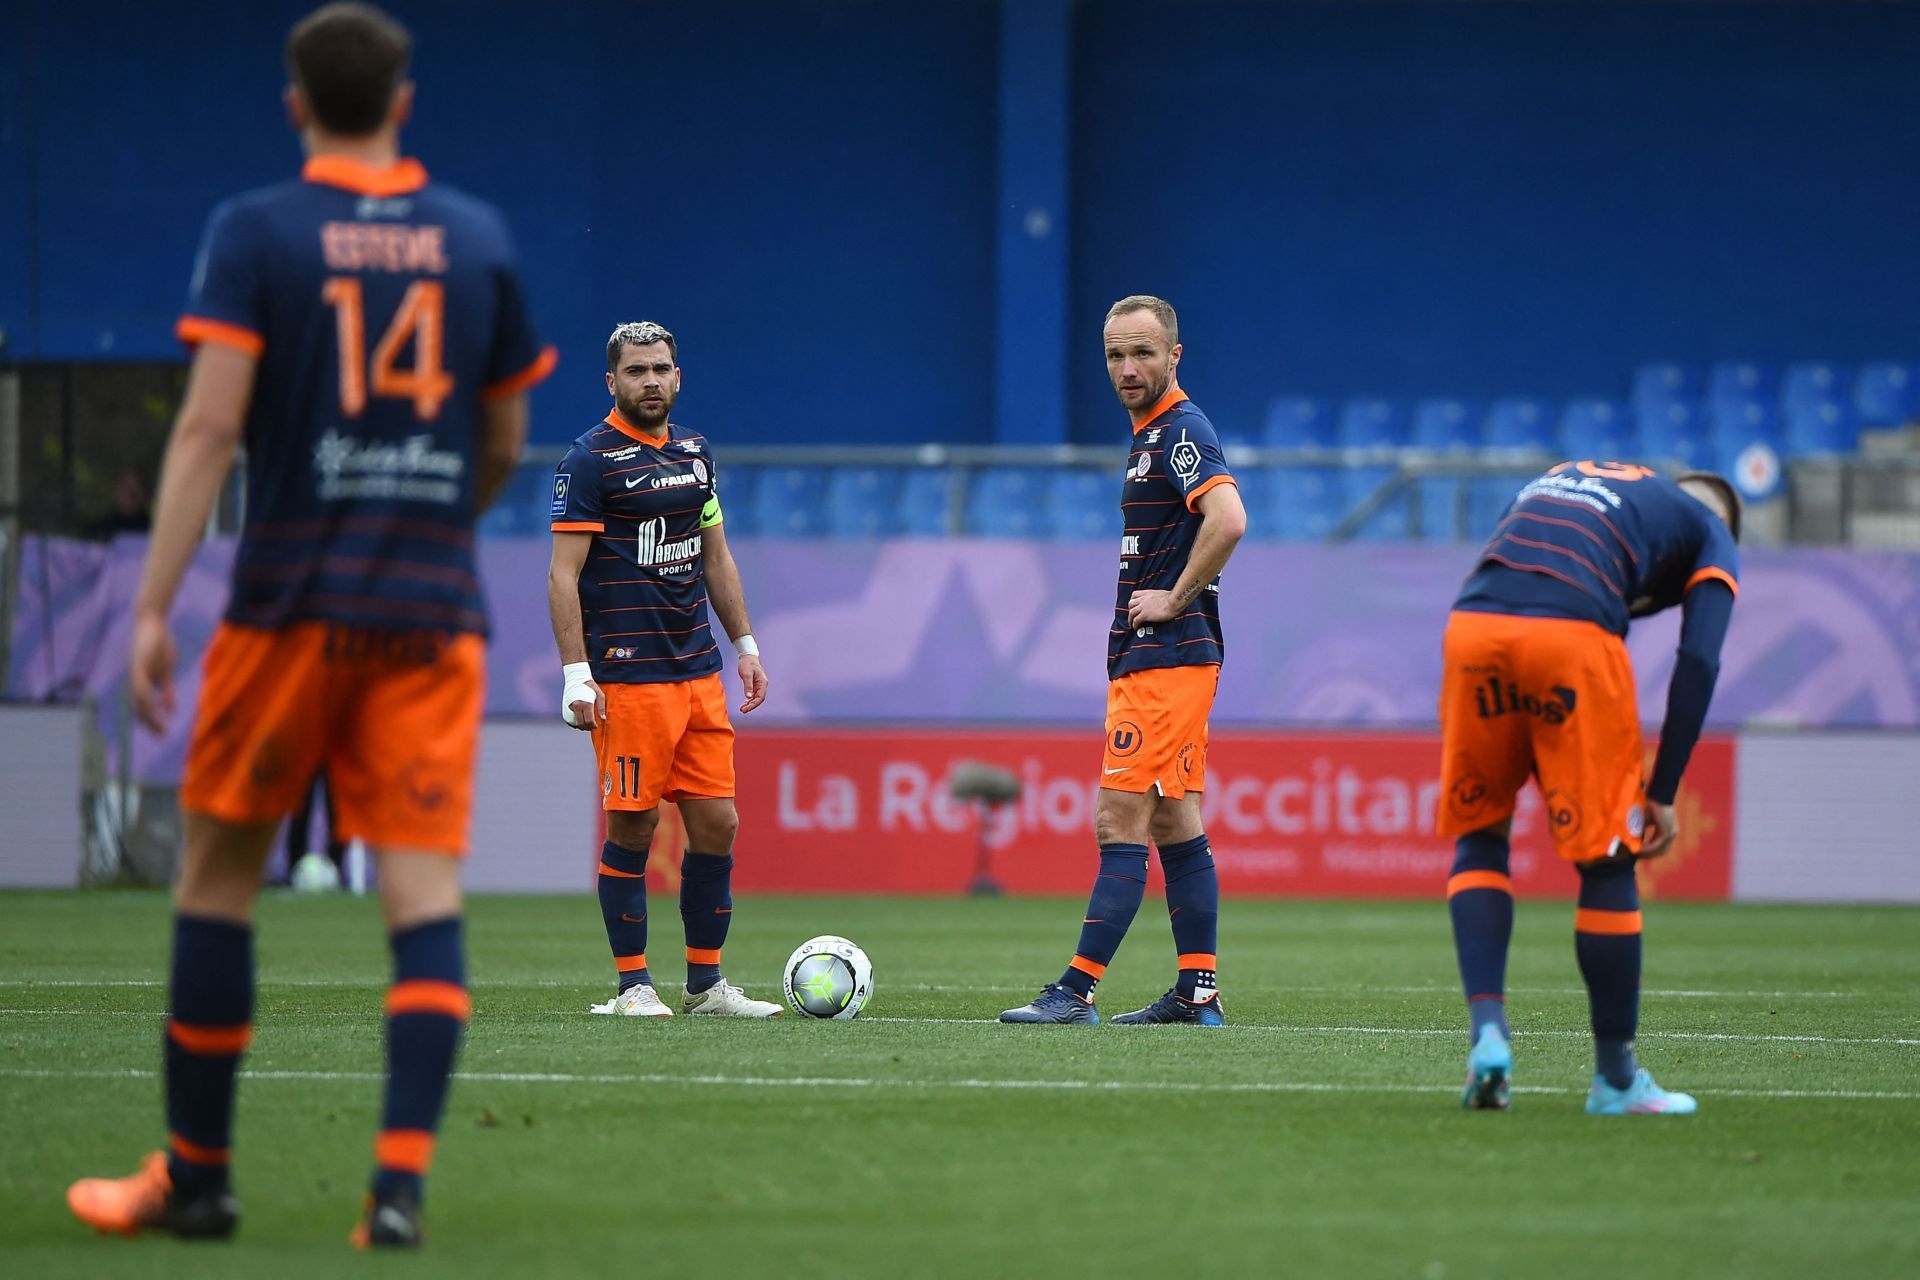 Montpellier will host Troyes on Sunday - Ligue 1